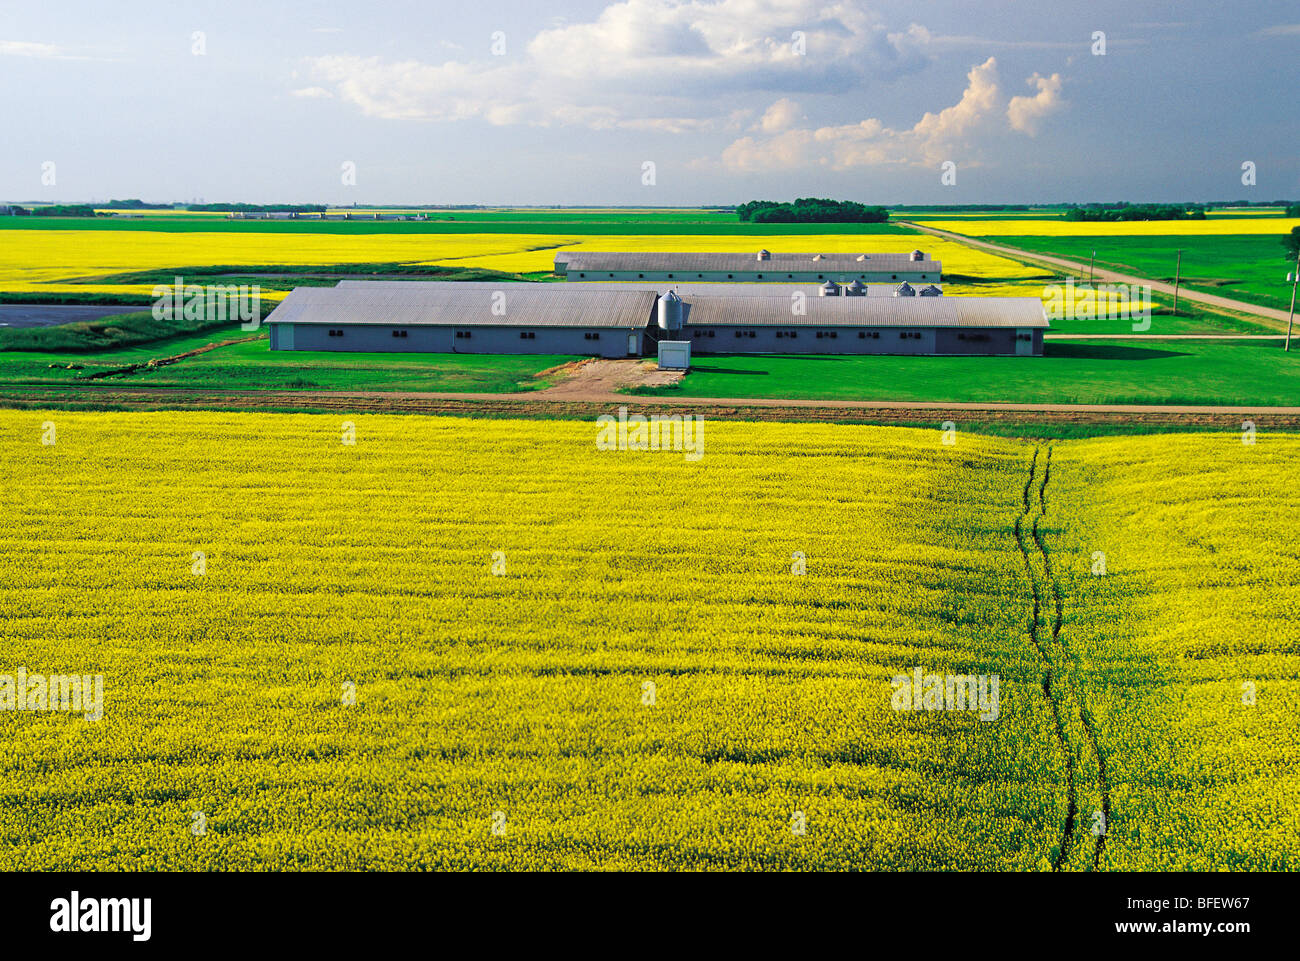 Blooming canola fields with hog barns in the background near Niverville, Manitoba, Canada Stock Photo